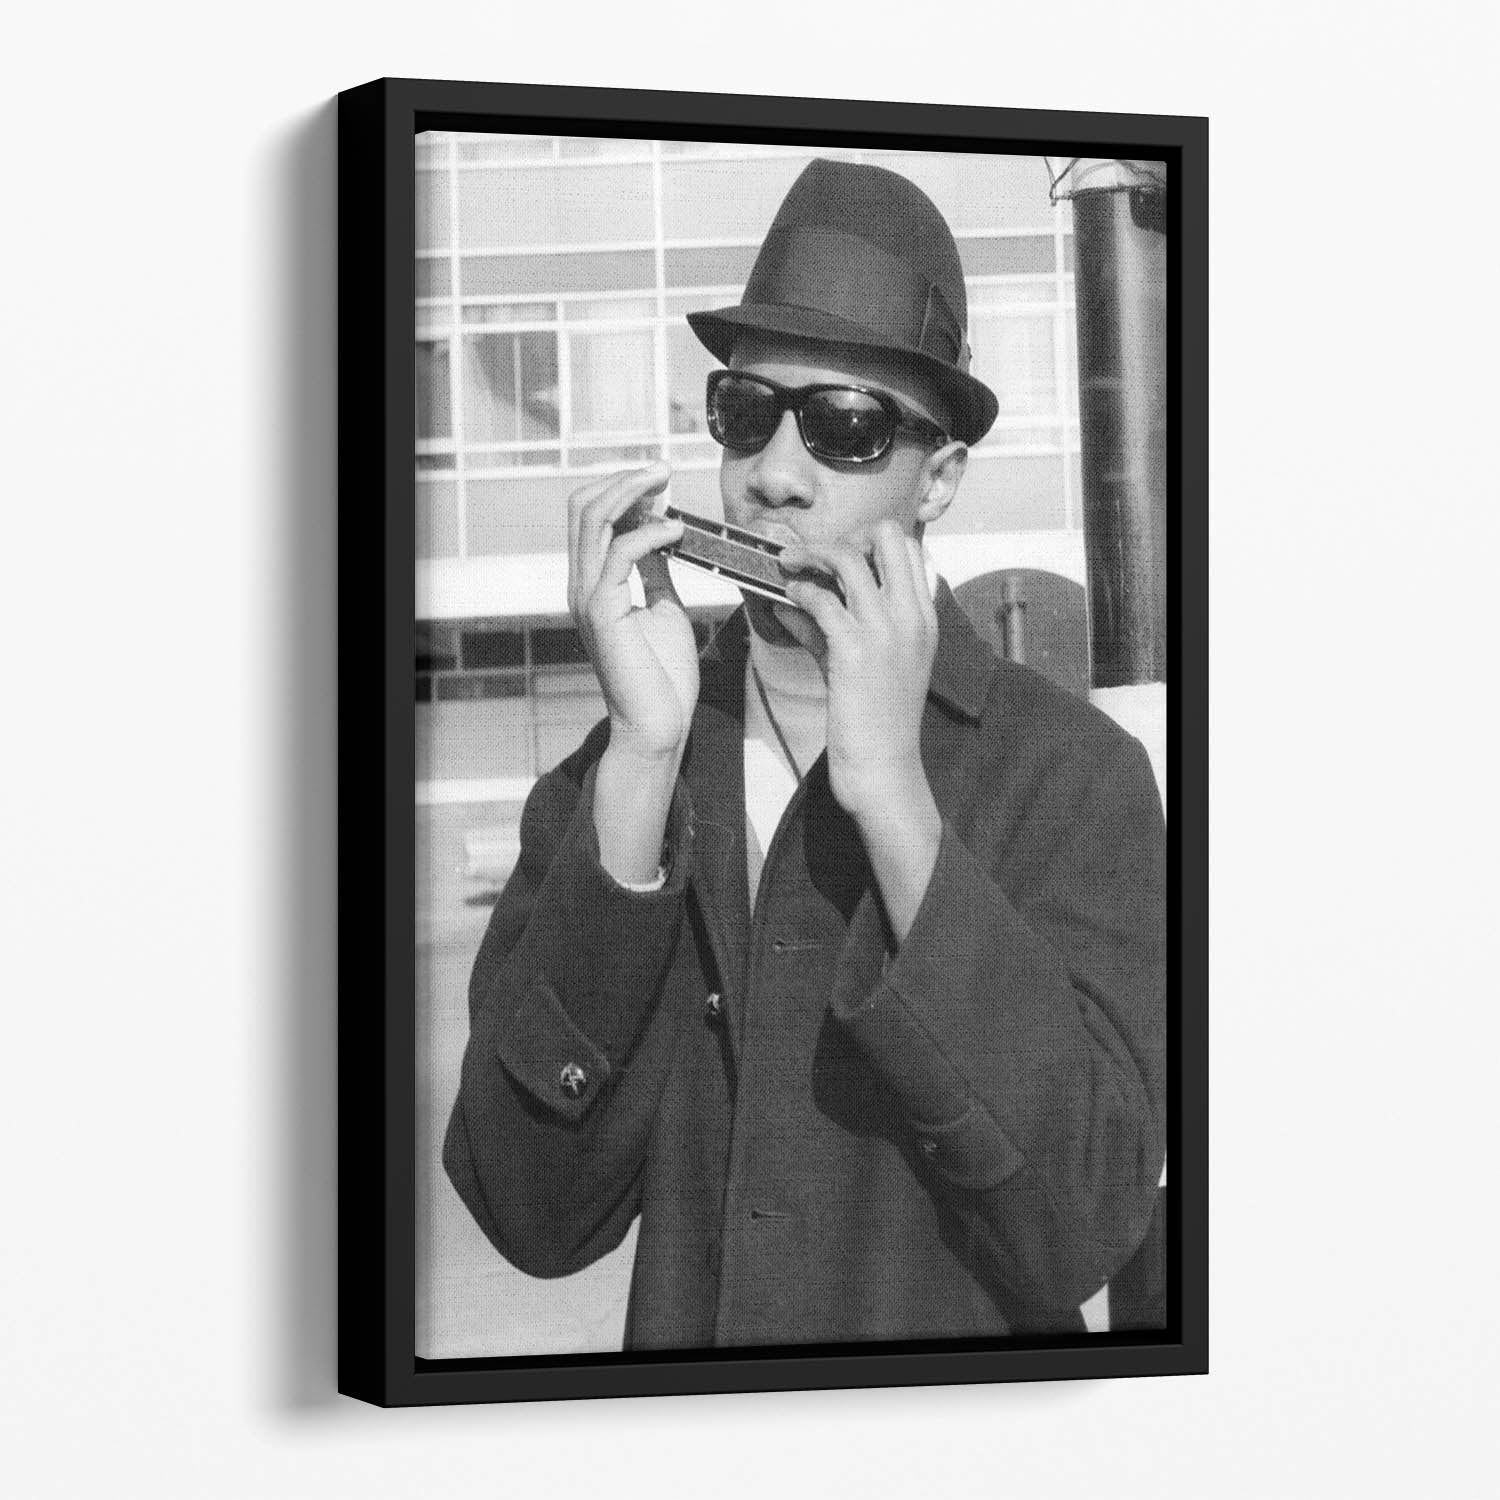 Stevie Wonder playing the harmonica Floating Framed Canvas